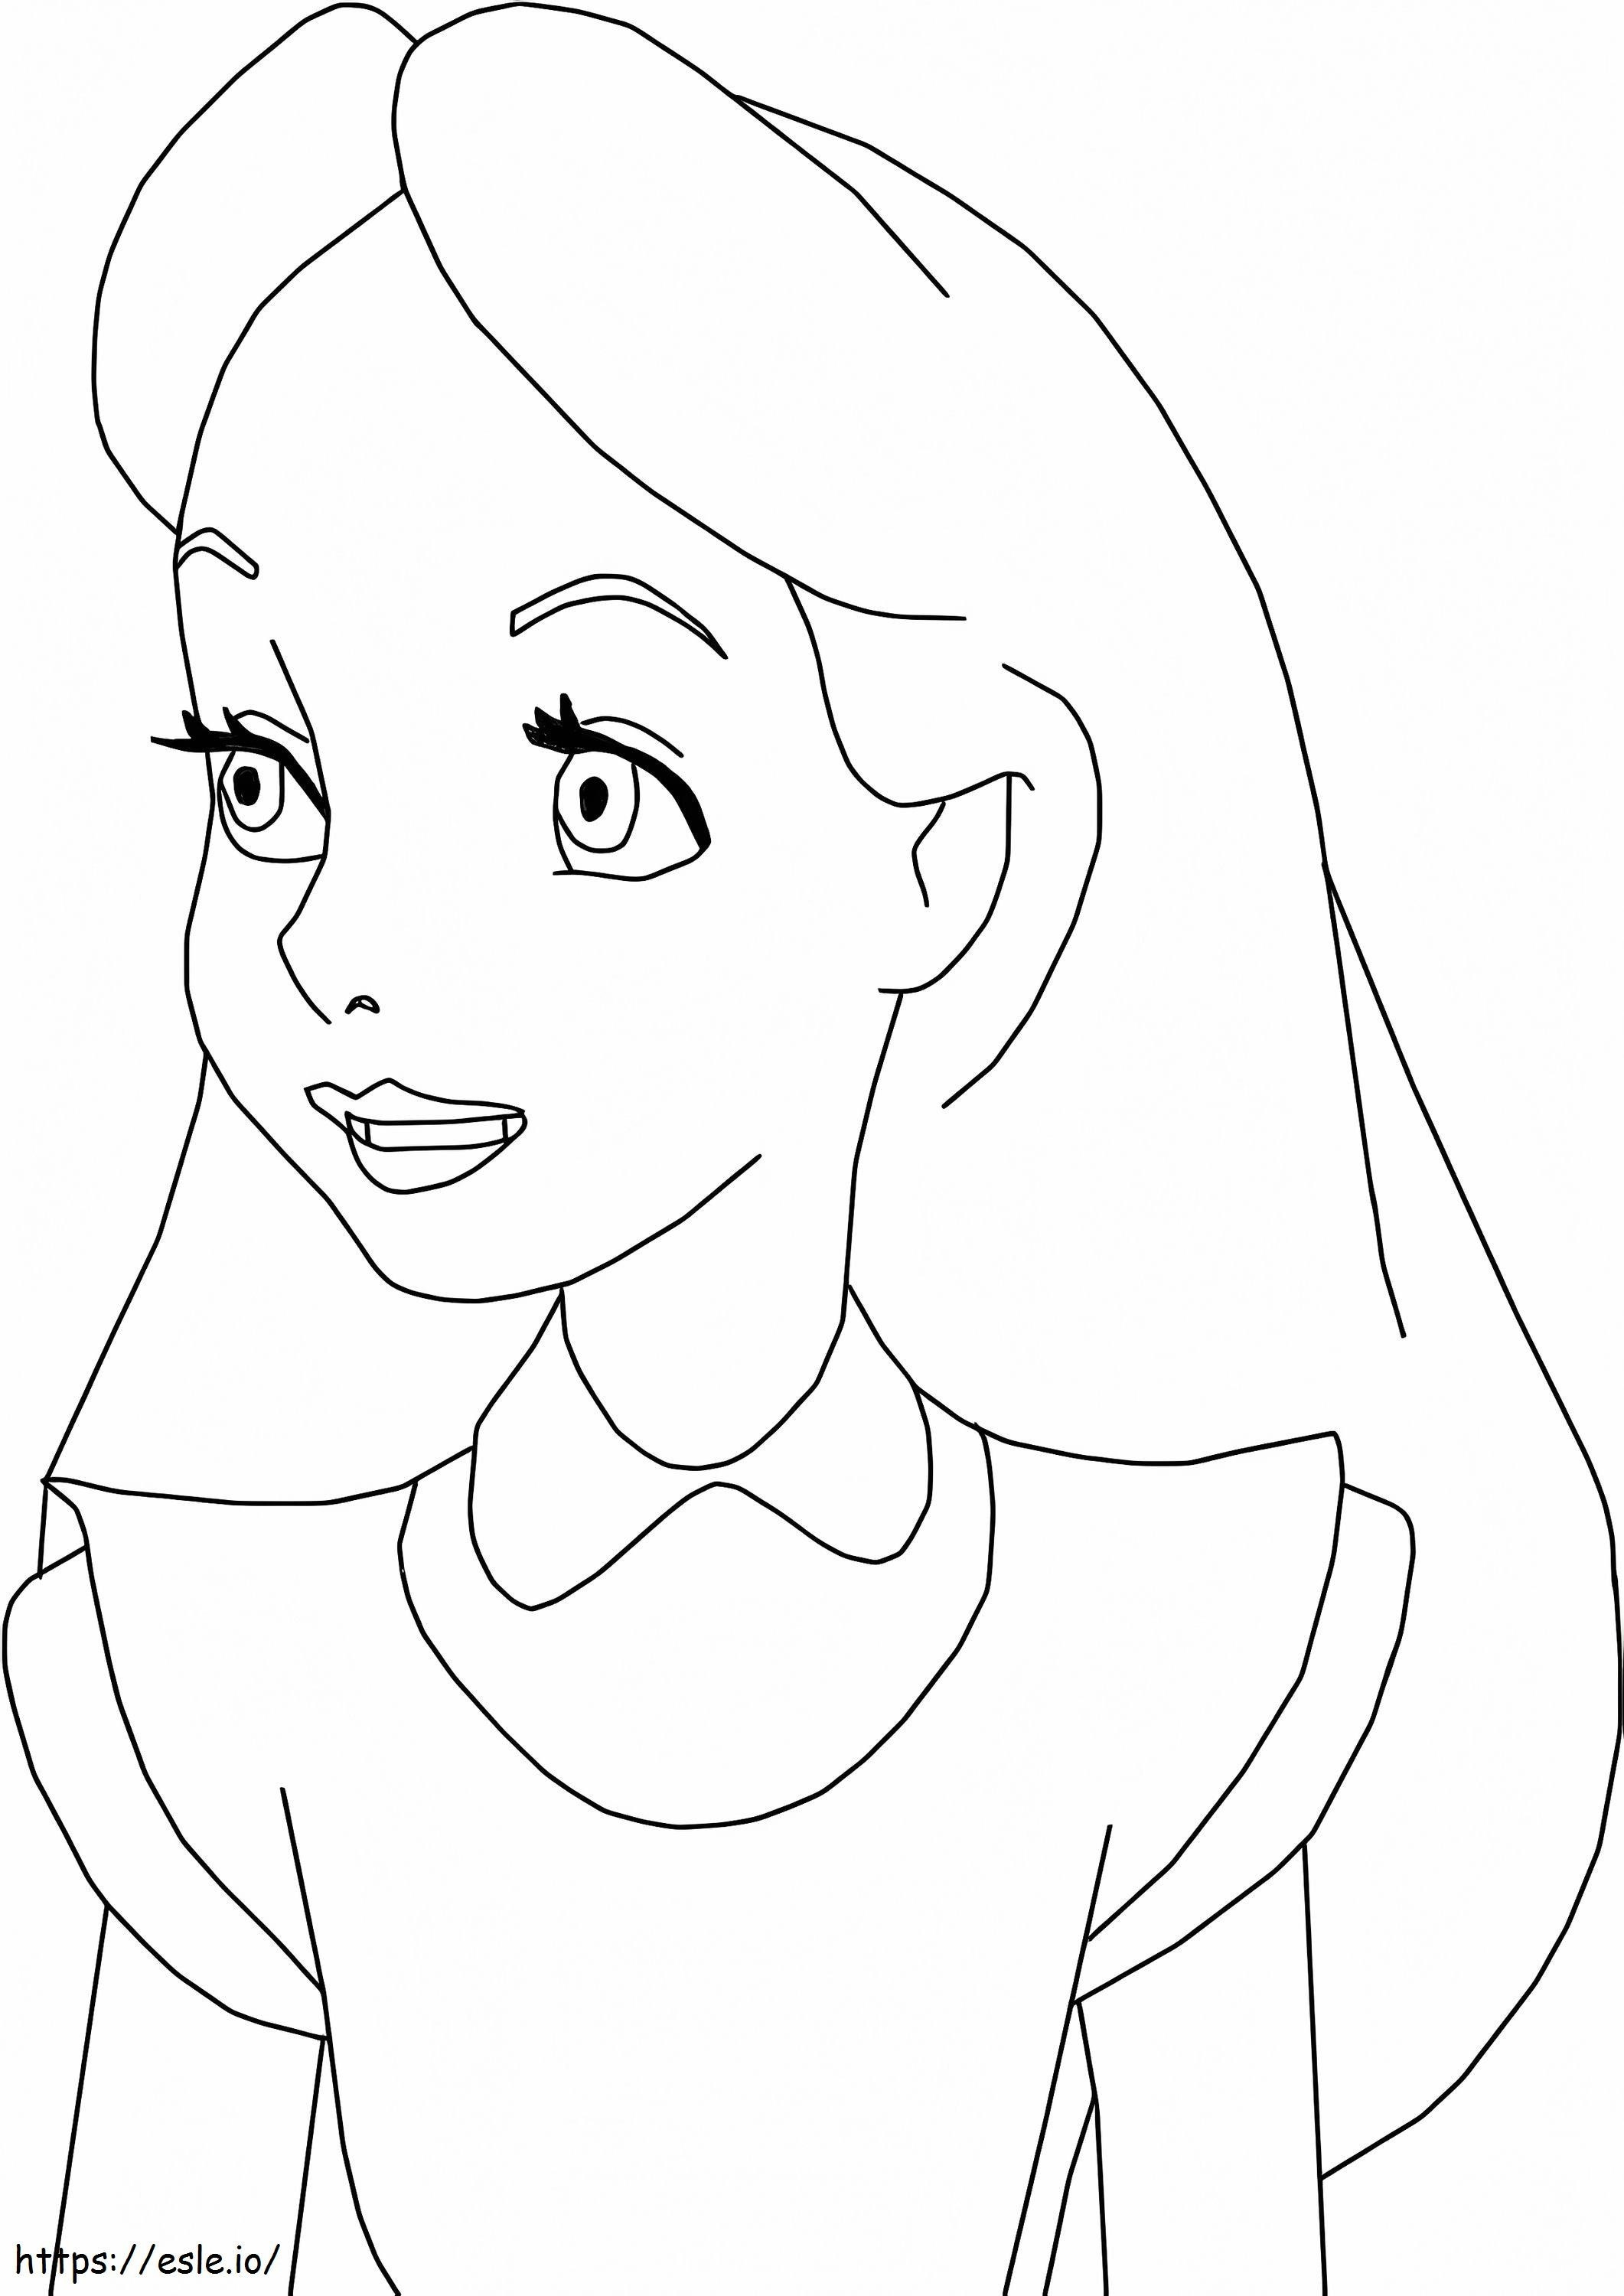 Adorable Alice From Alice In Wonderland coloring page